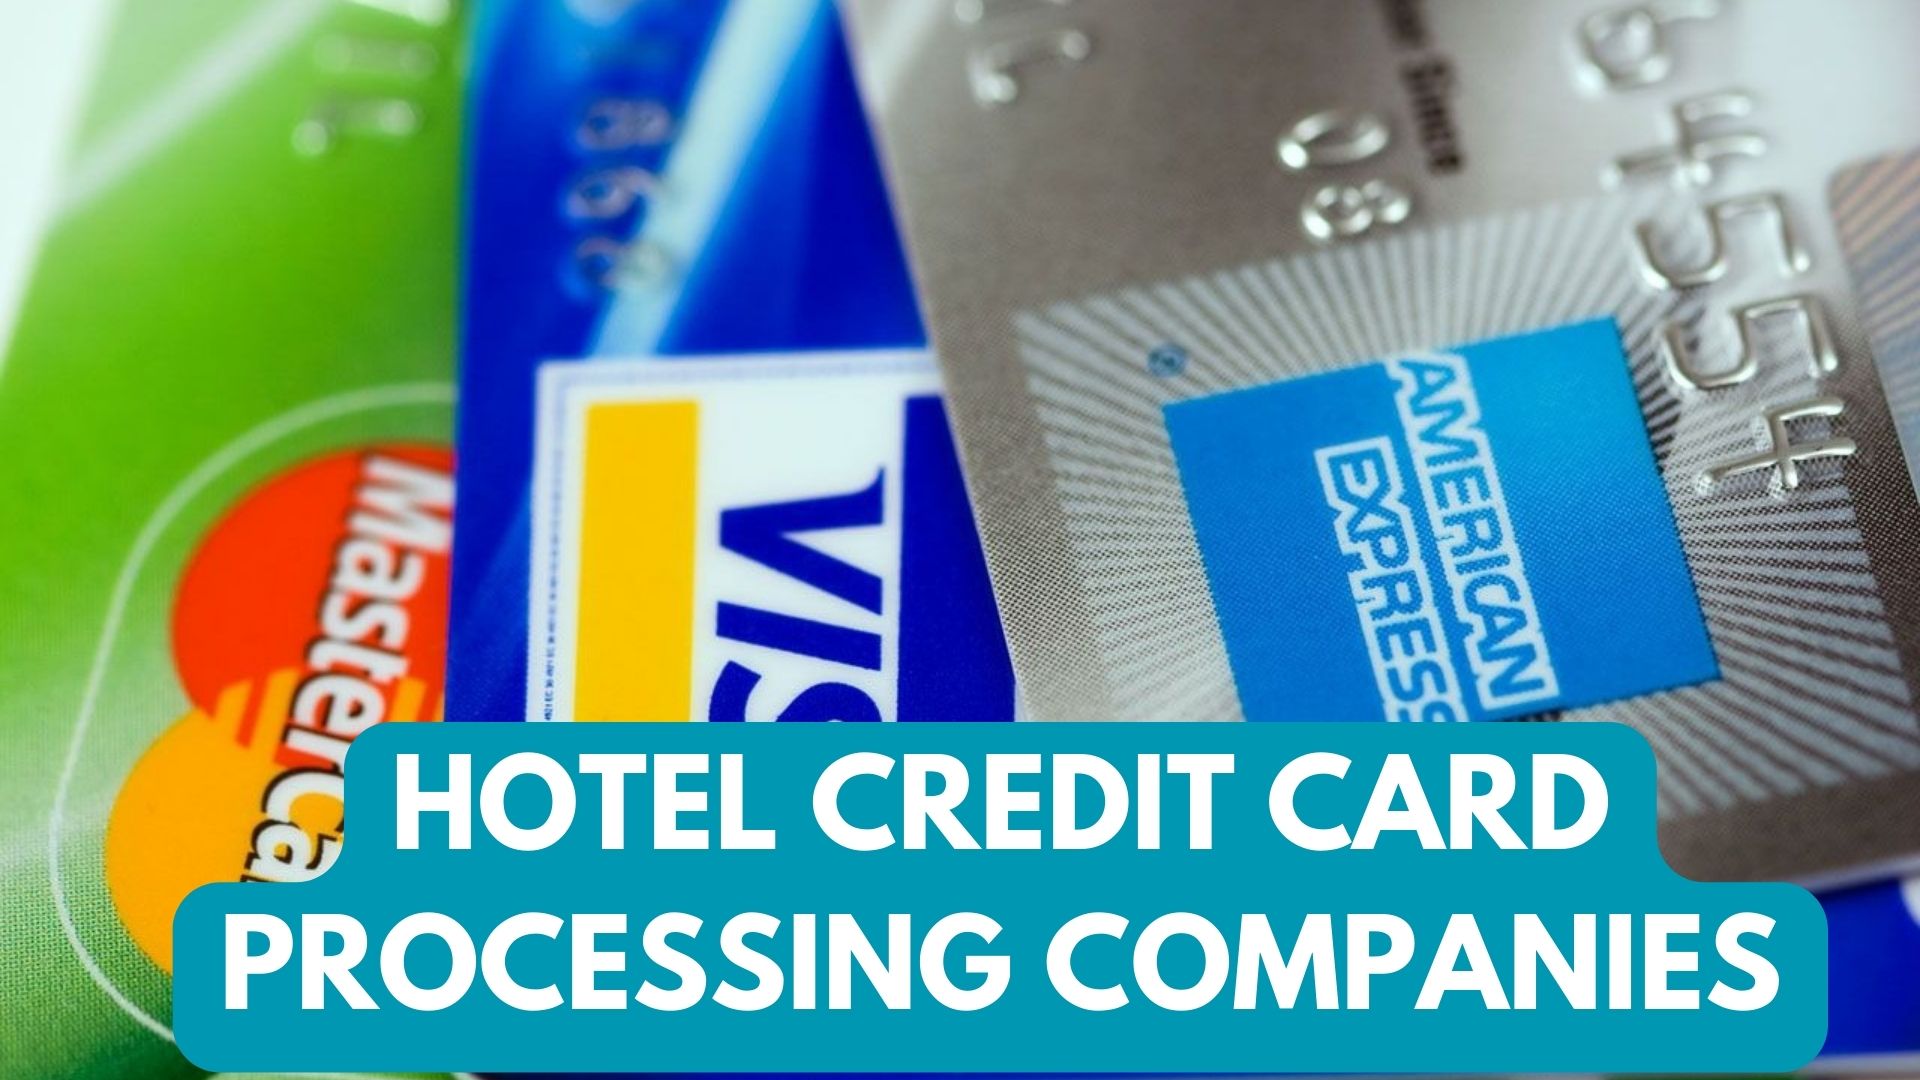 Hotel Credit Card Processing Companies